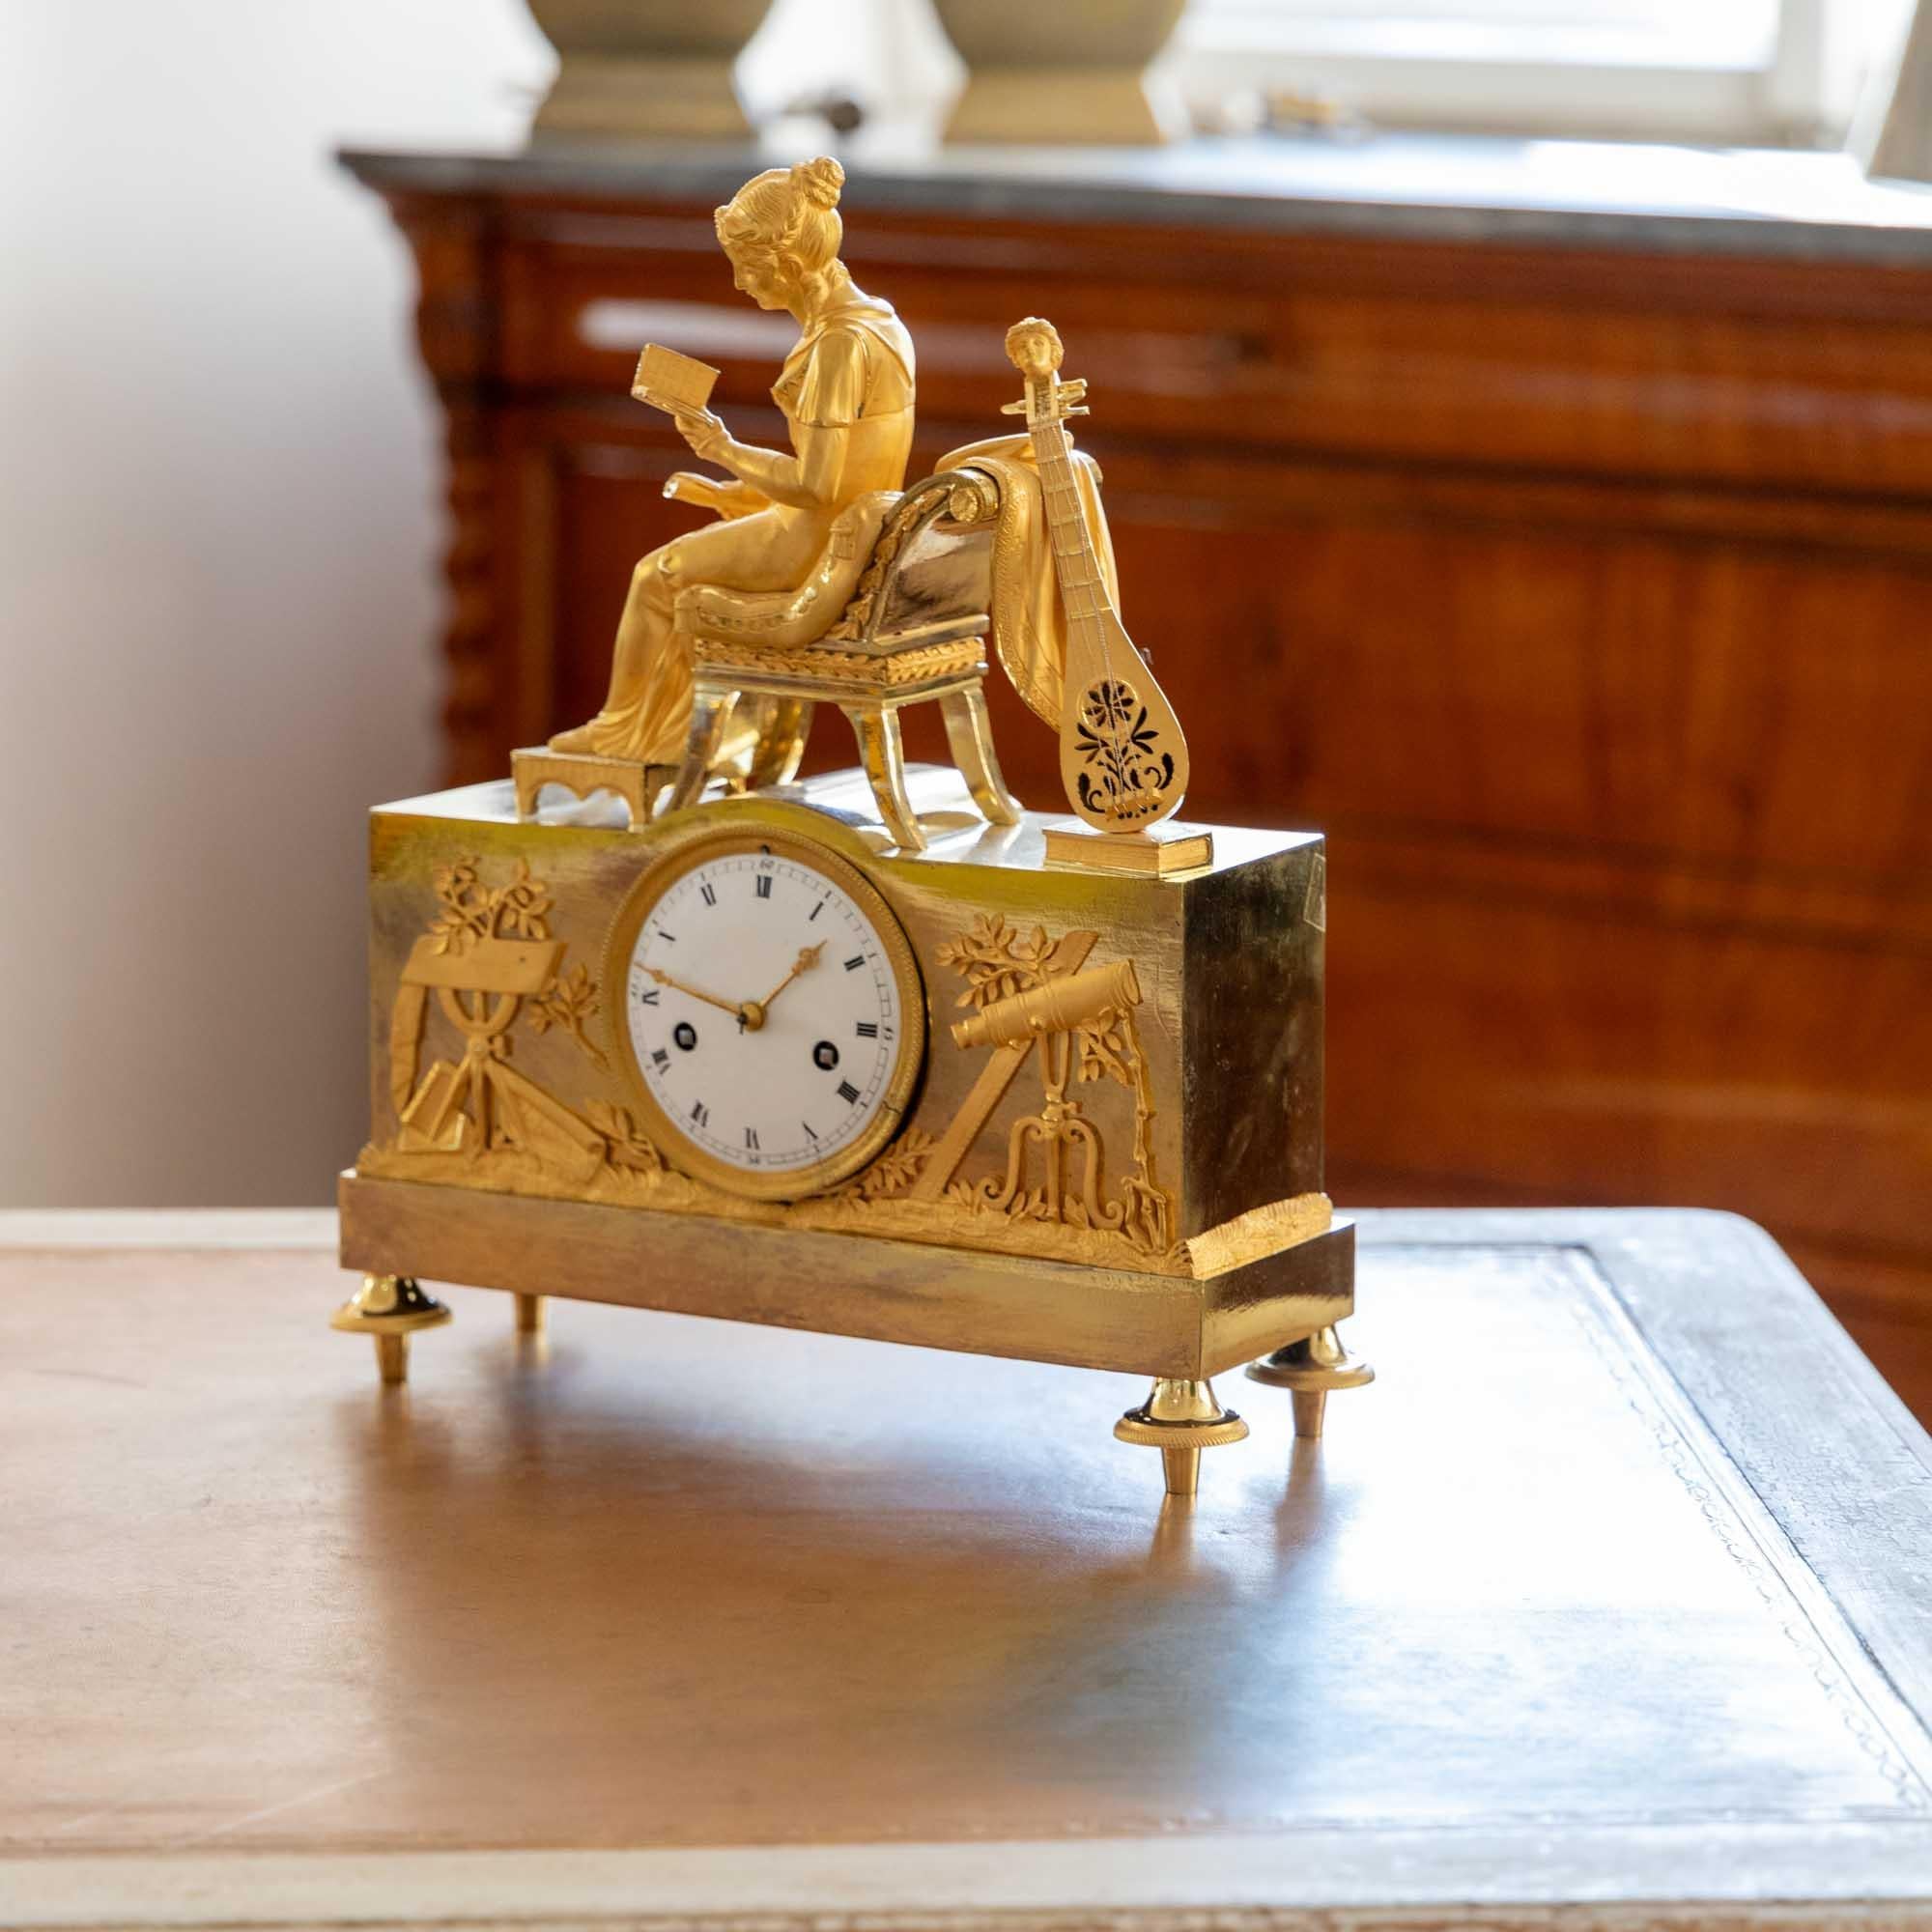 Empire mantel clock with enameled dial and fire-gilt case. The clock is crowned by a full-figure young lady sitting on a Klismos chair and reading a book. Her feet rest on a stool and a lute leans against her chair.